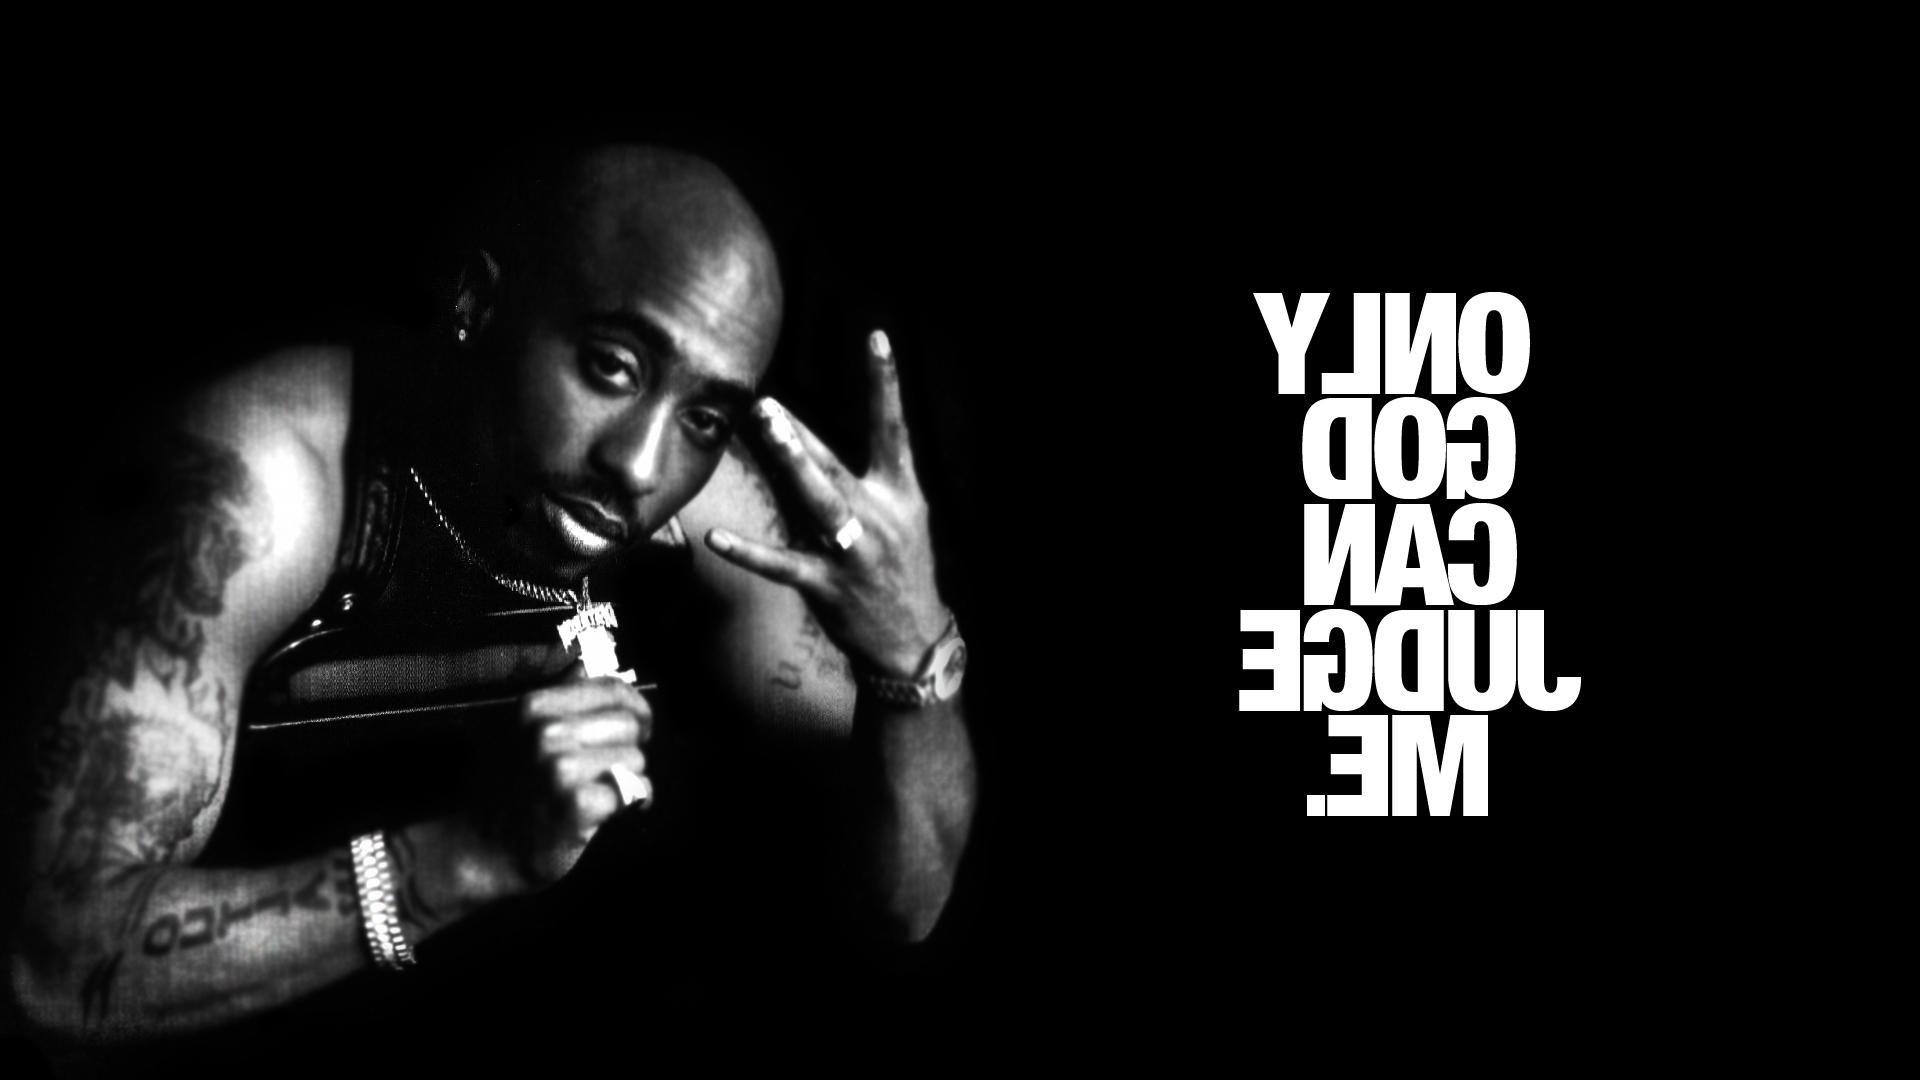 2pac only god can judge me wqllpqperss